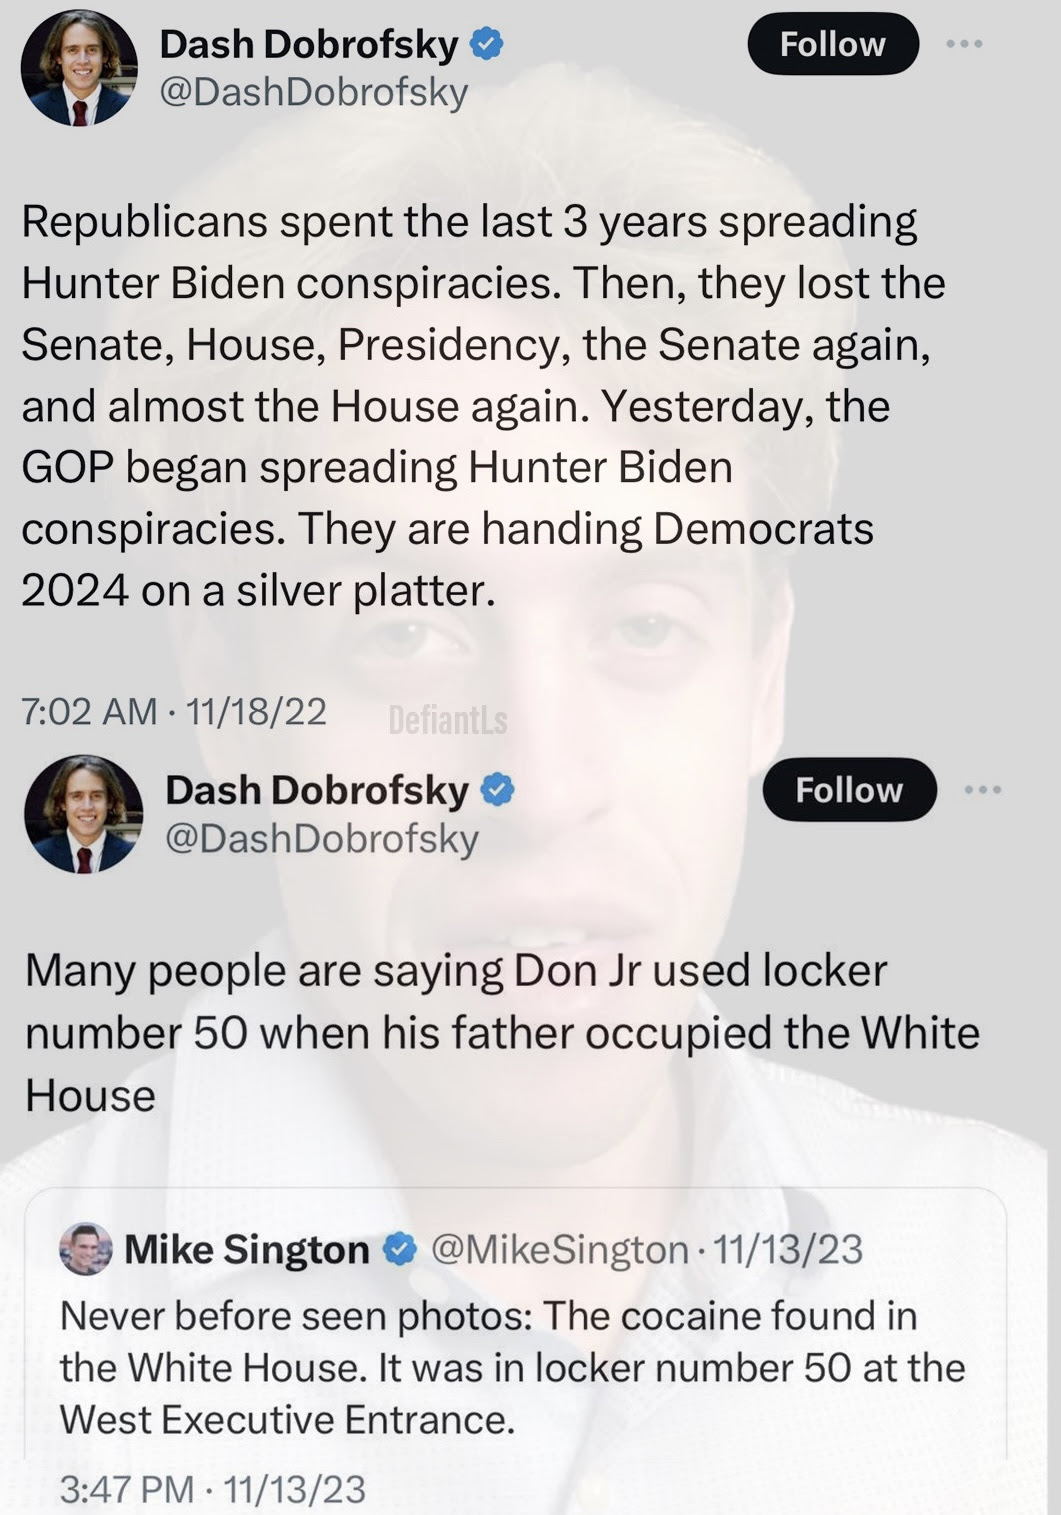 Hypocrite Dash Dobrofsky goes on and on about Republicans conspiracies about Hunter Biden then does his own about Trump Junior.